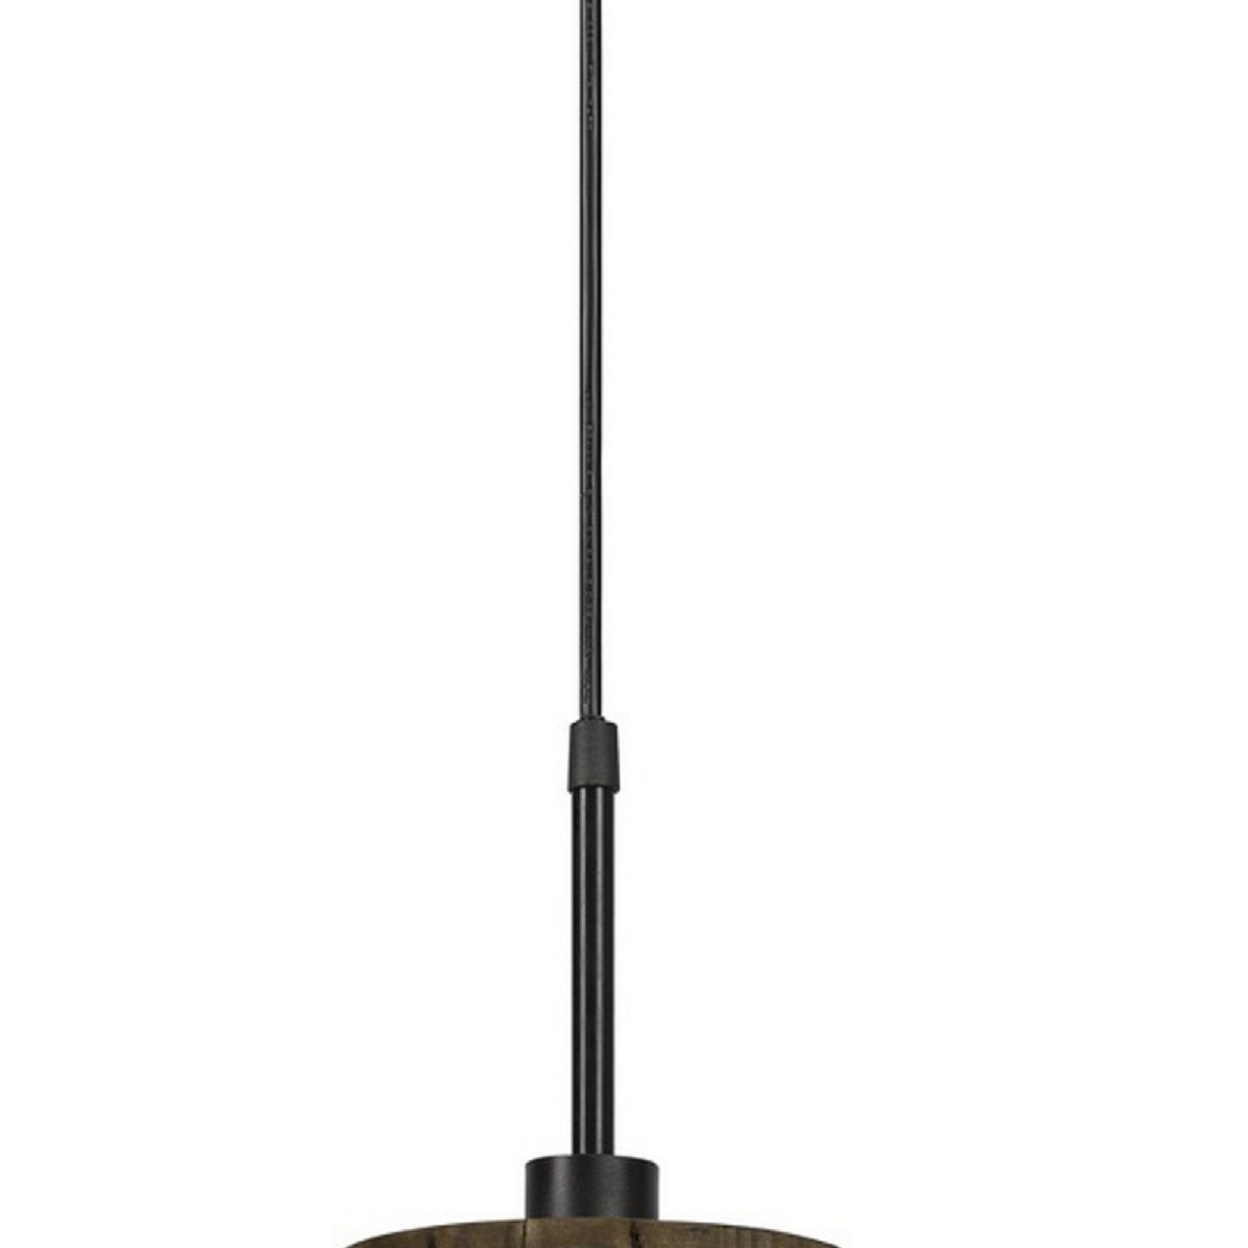 6 Inch Modern Pendent Light With Glass Shade, Wood Accent, Metal, Brown- Saltoro Sherpi